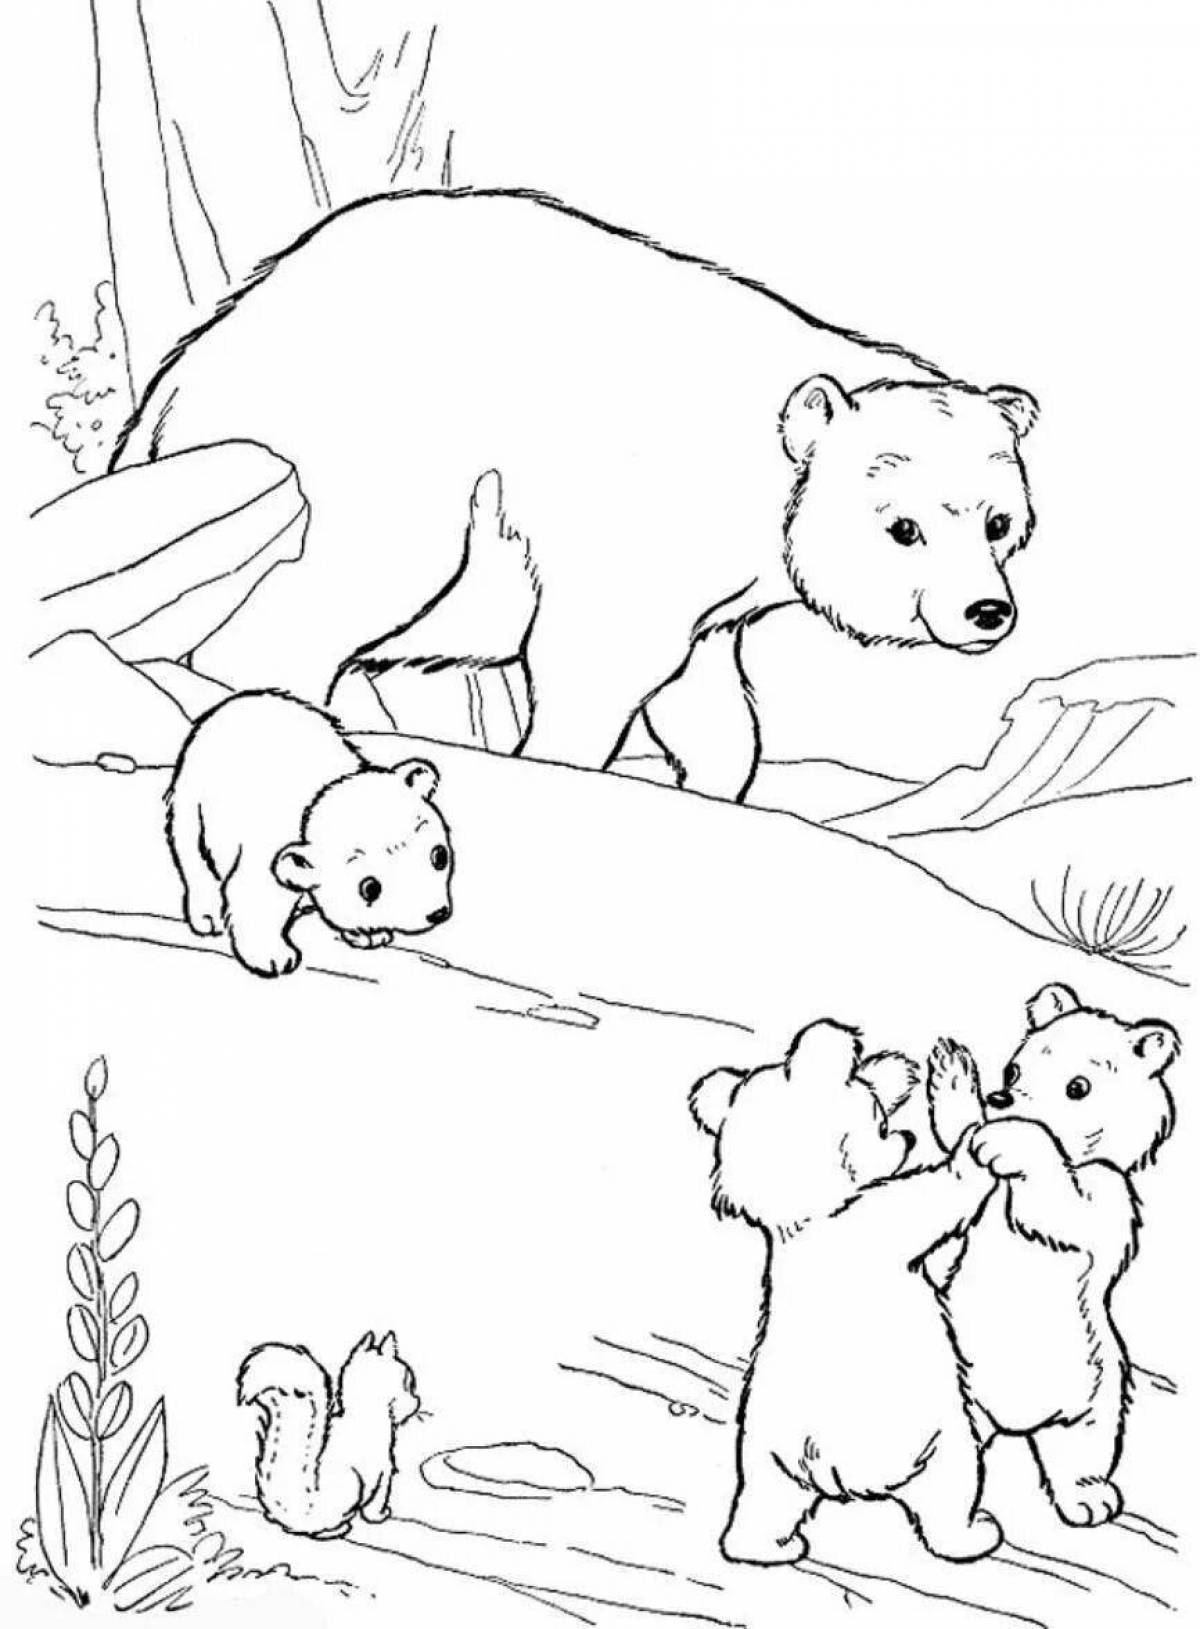 Fabulous polar bear coloring book for kids 5-6 years old